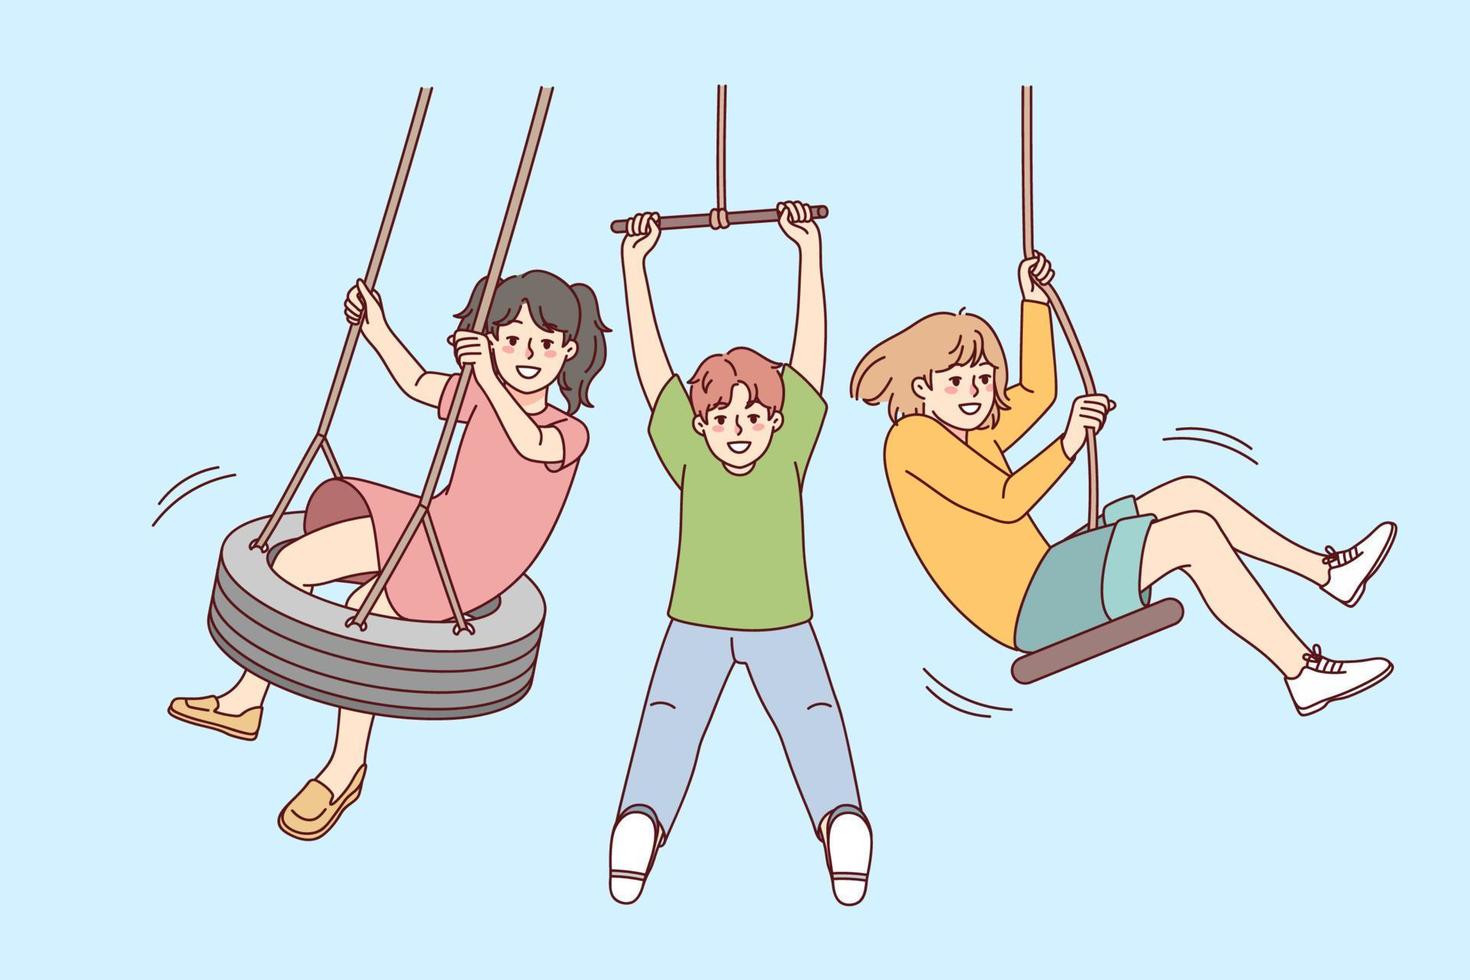 Happy small kids have fun playing outside. Smiling little children enjoy outdoor activities during summer vacation. Vector illustration.